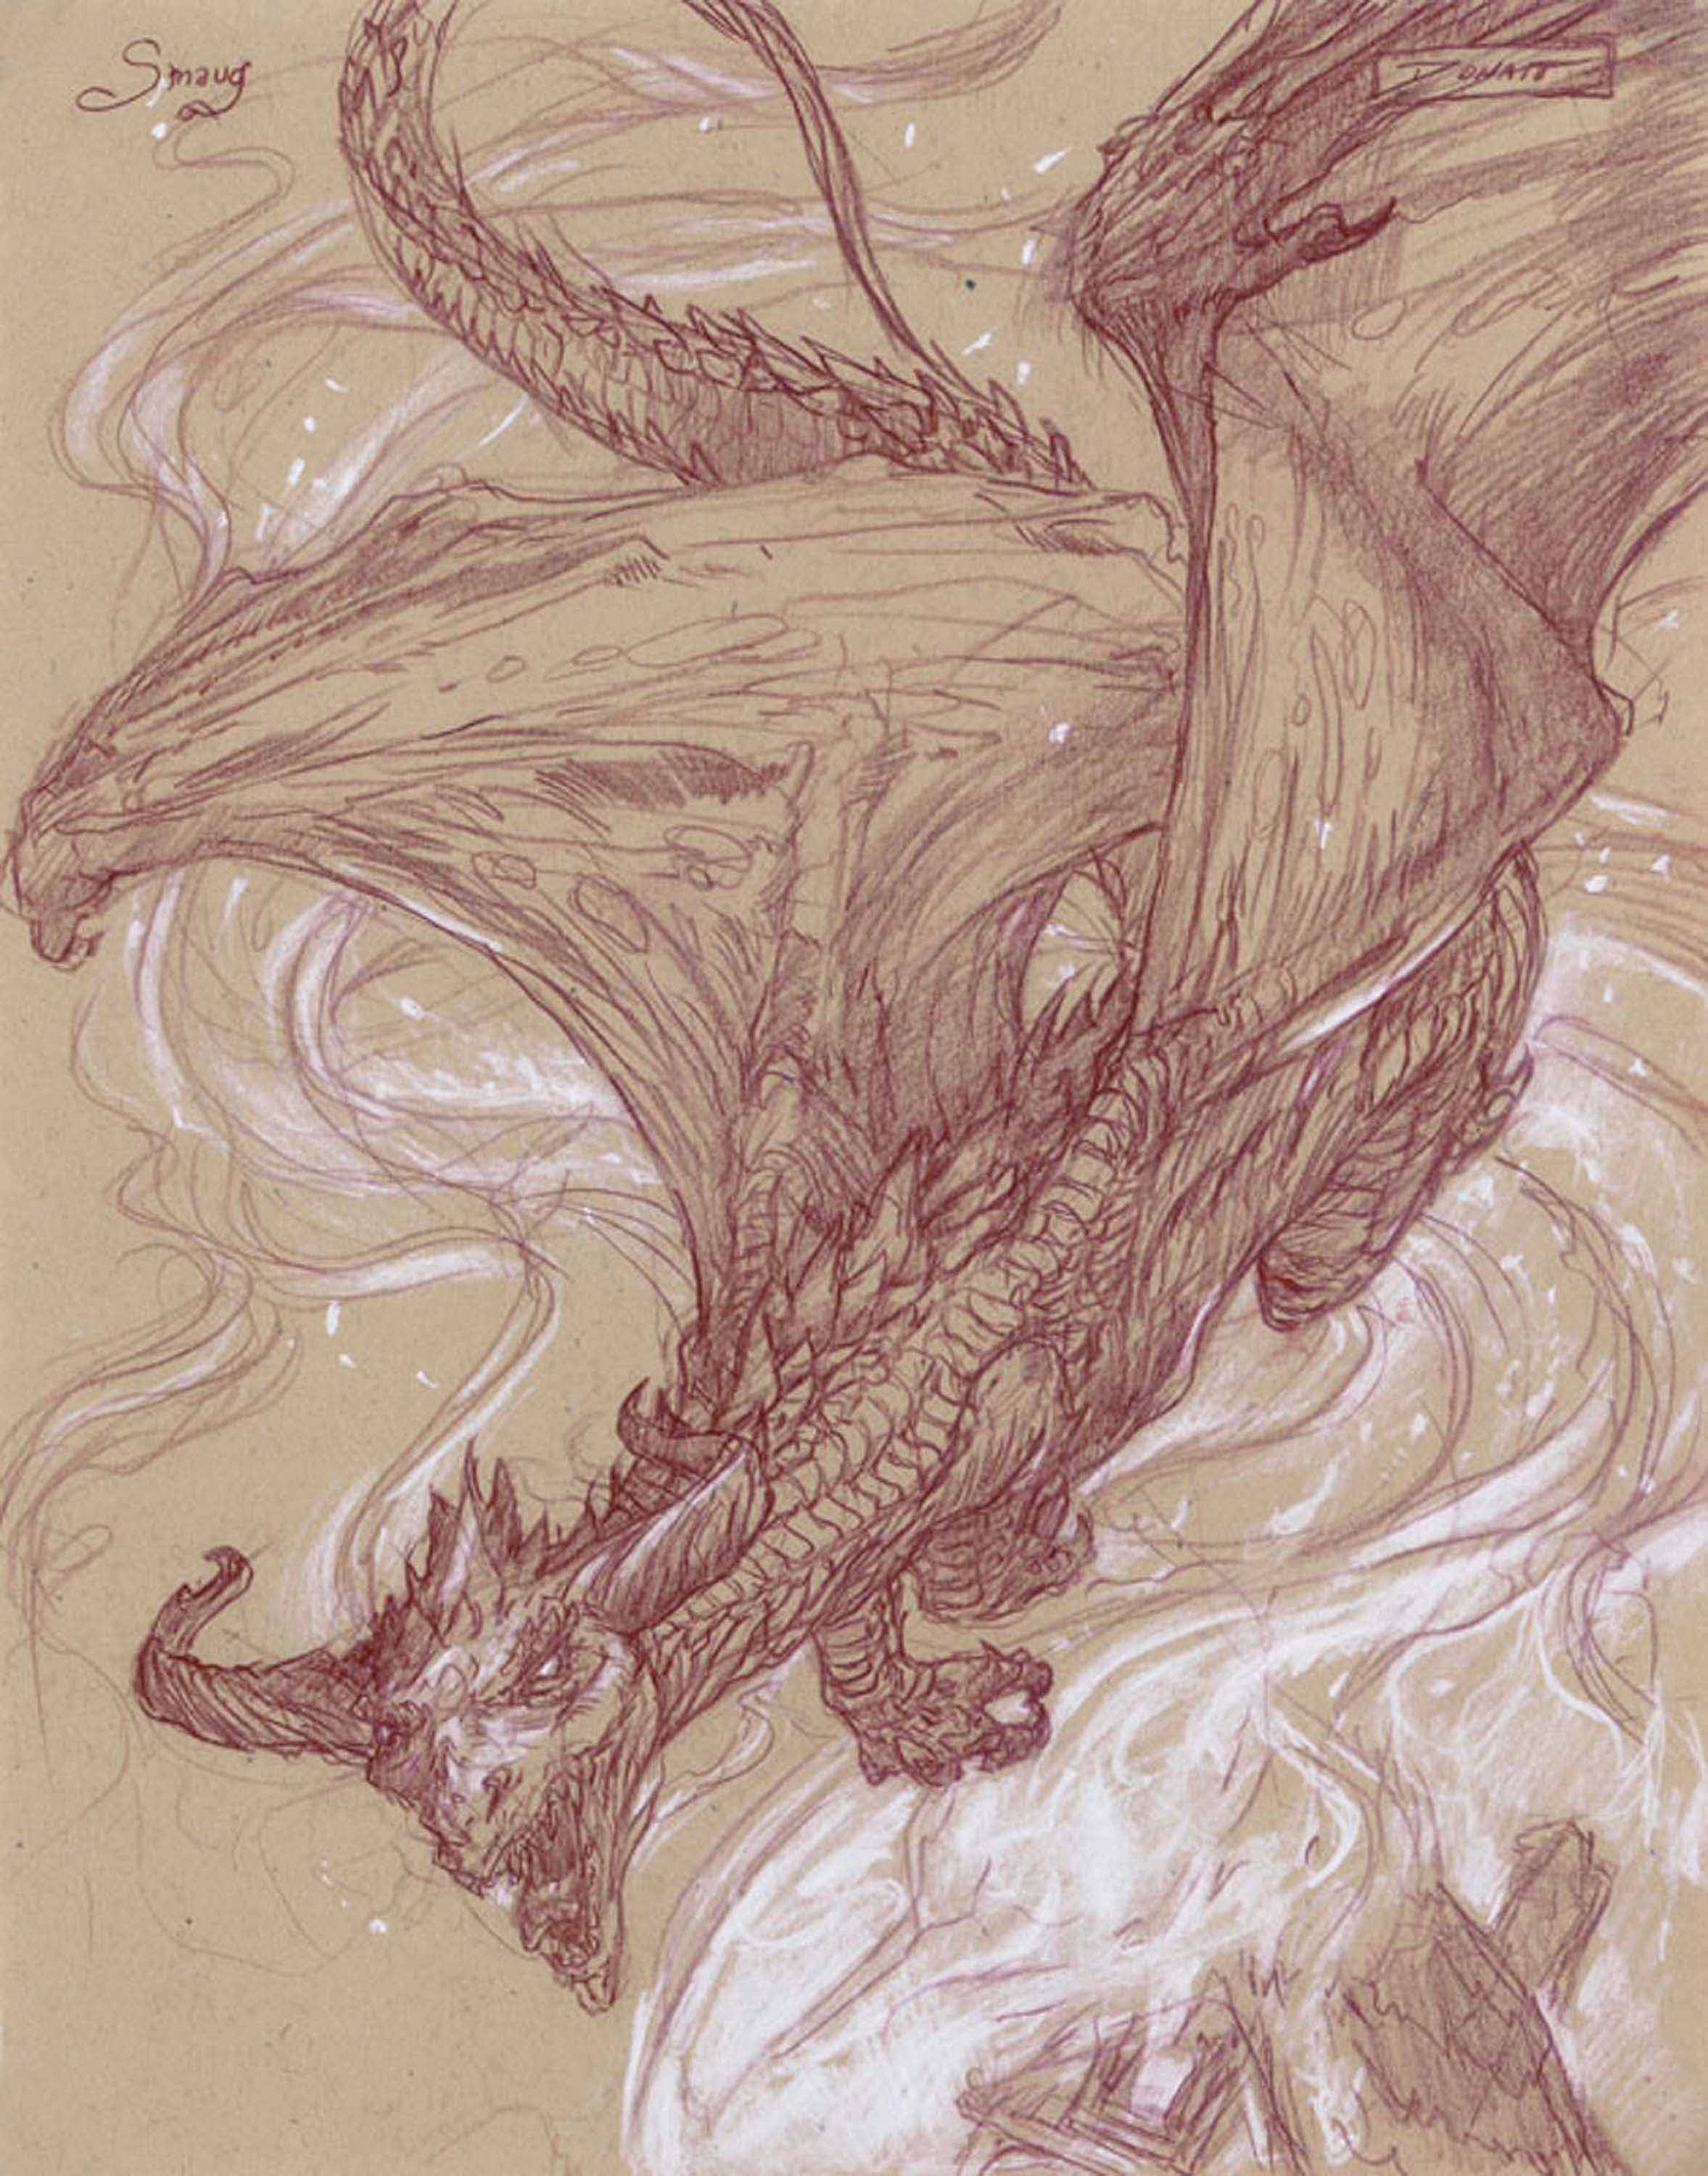 Laketwon is Burning!
14" x11"  Watercolor Pencil and Chalk on Toned paper 2014
private collection